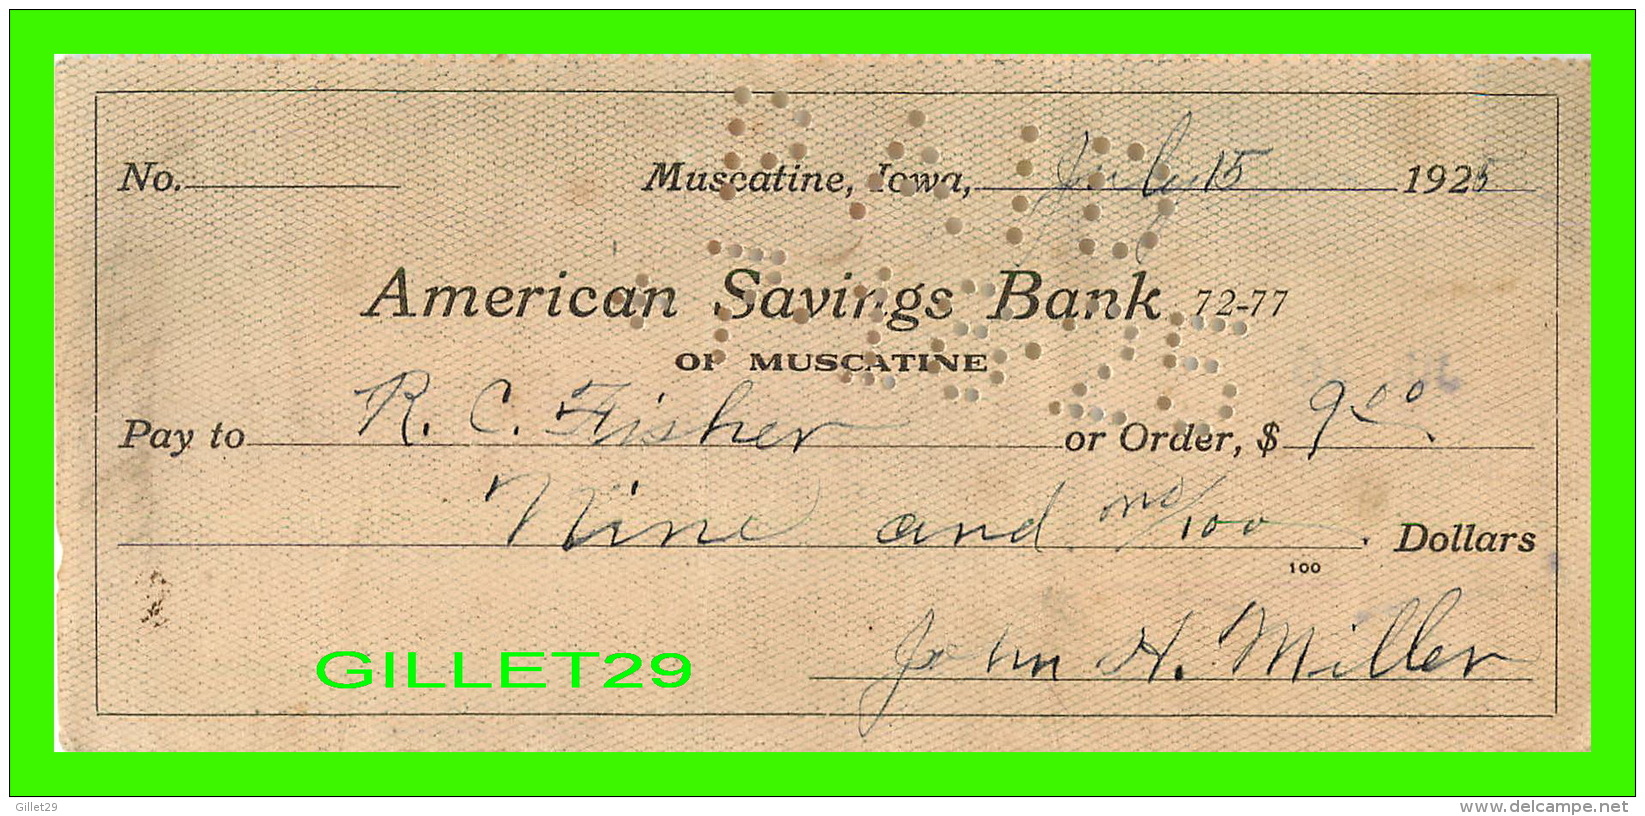 CHÈQUES - AMERICAN SAVINGS BANK, MUSCATINE, IOWA - IN 1925 - R. C. FISHER - - Cheques & Traverler's Cheques